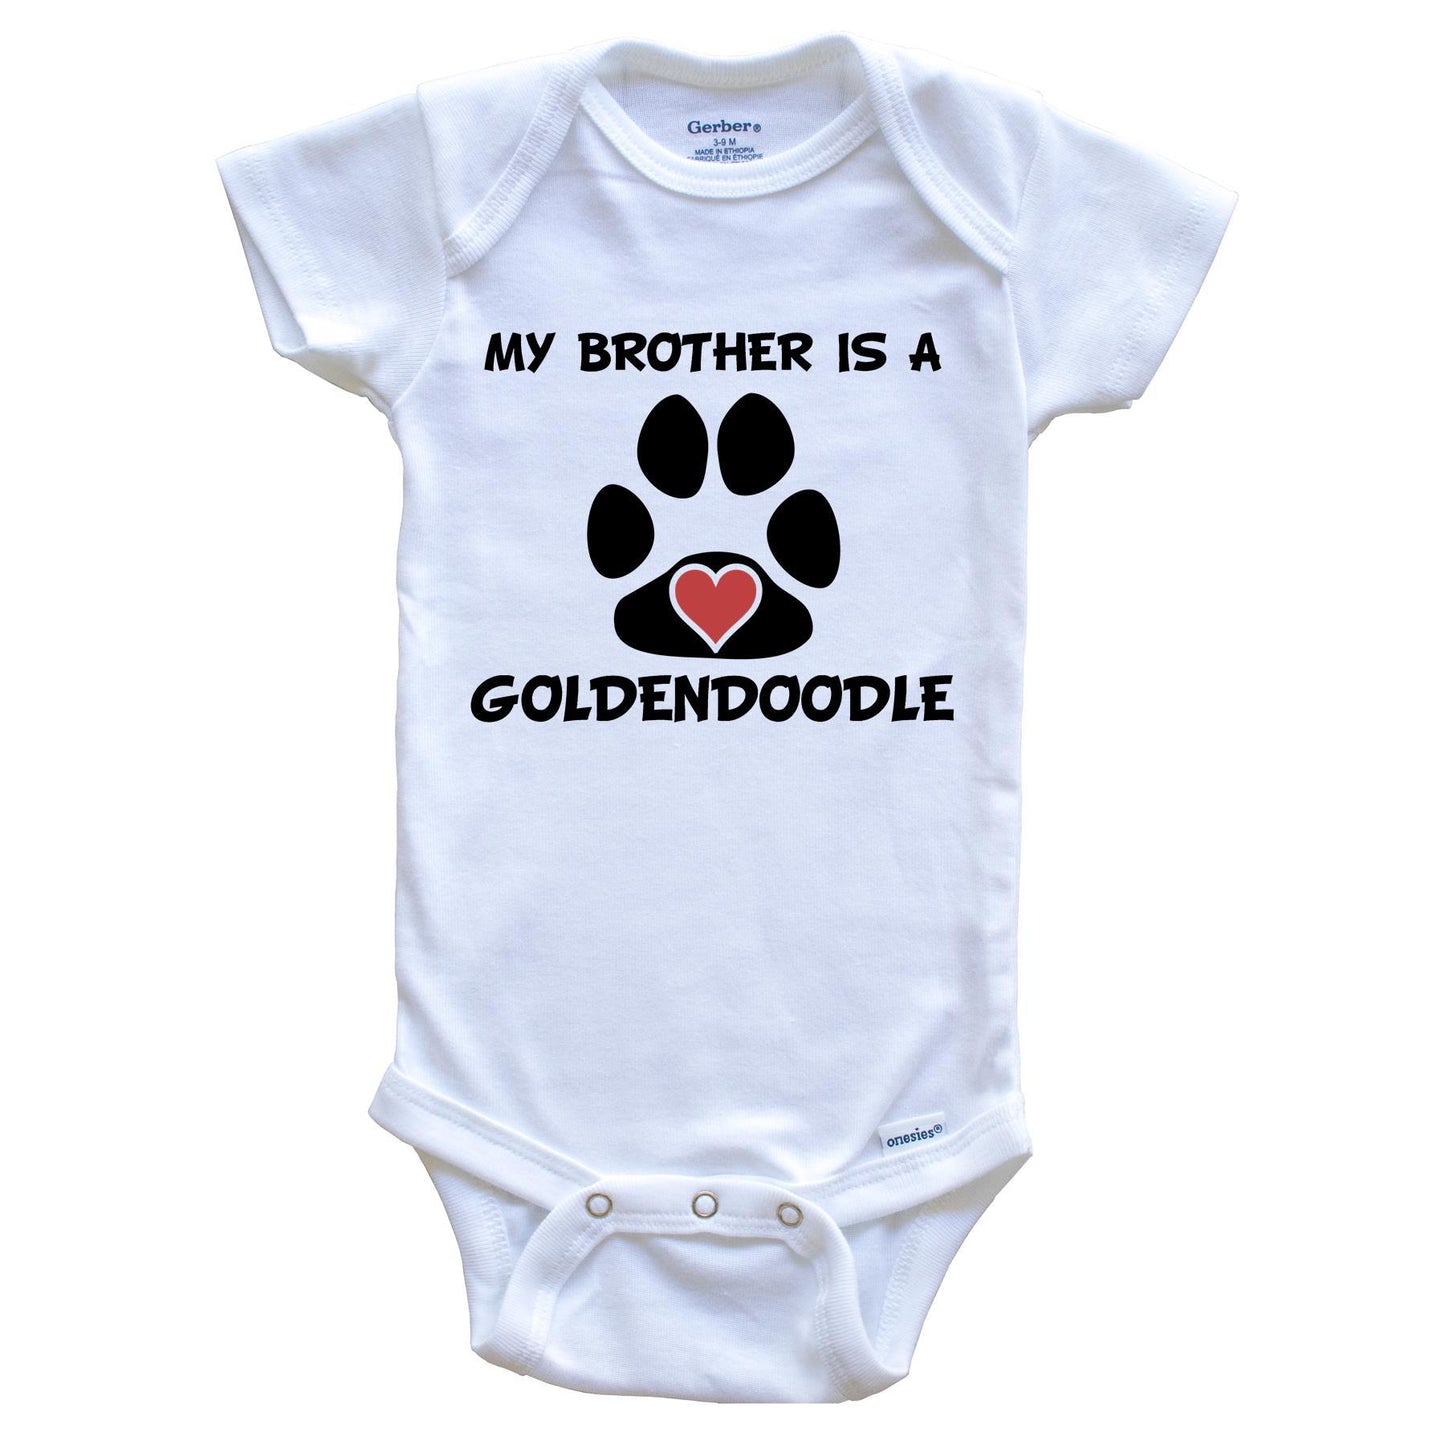 My Brother Is A Goldendoodle Baby Onesie